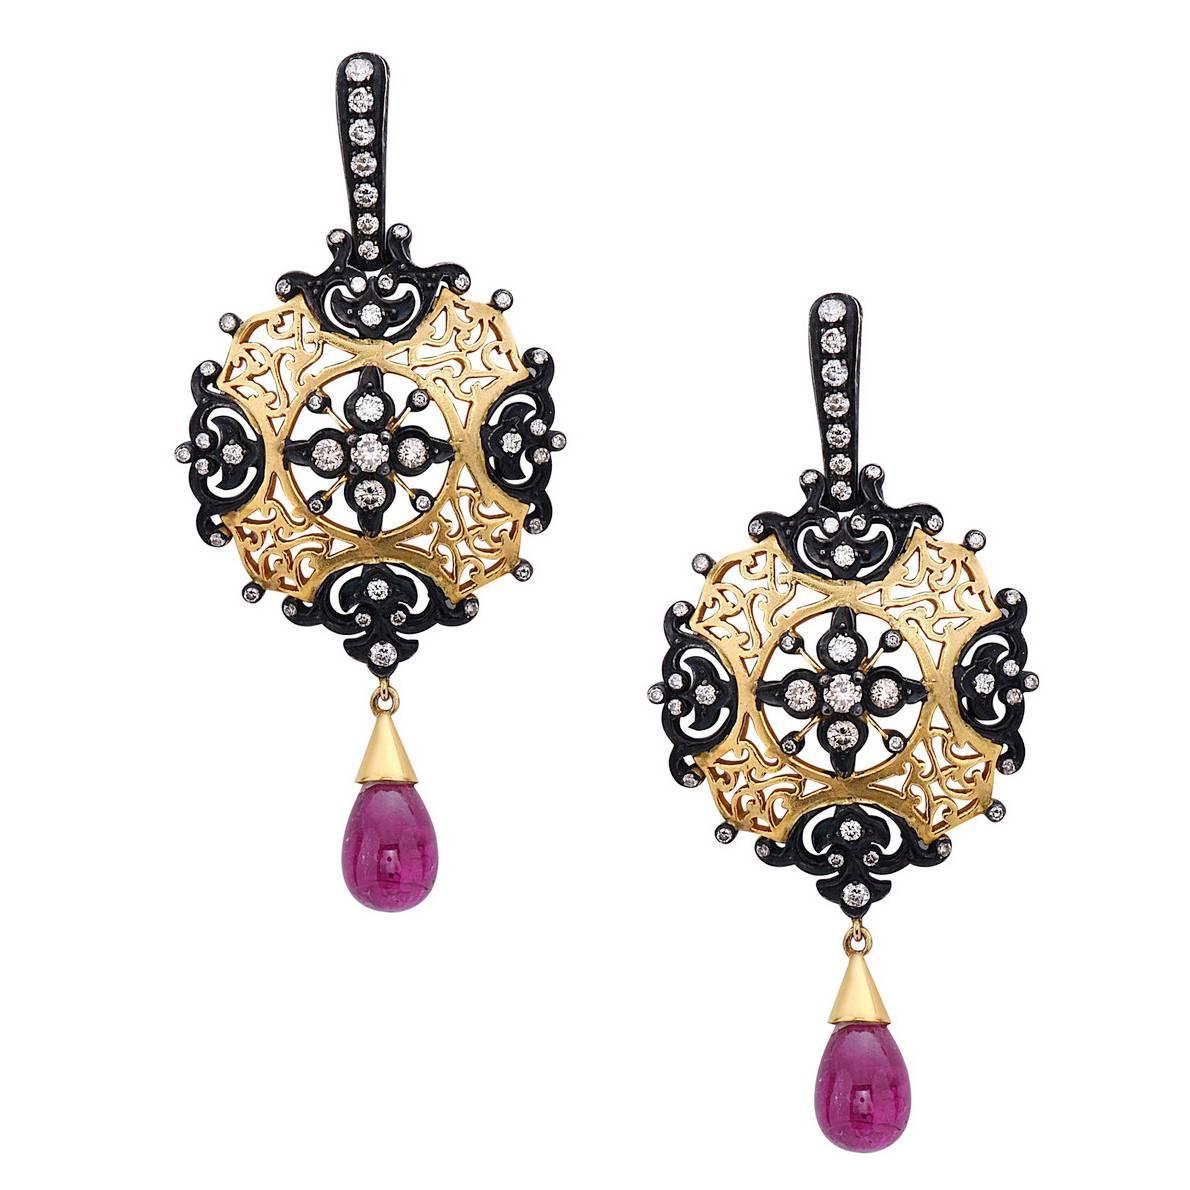 Artistic Tourmaline & Diamond Cut-Out Earrings Made In 14k Gold & Silver For Sale